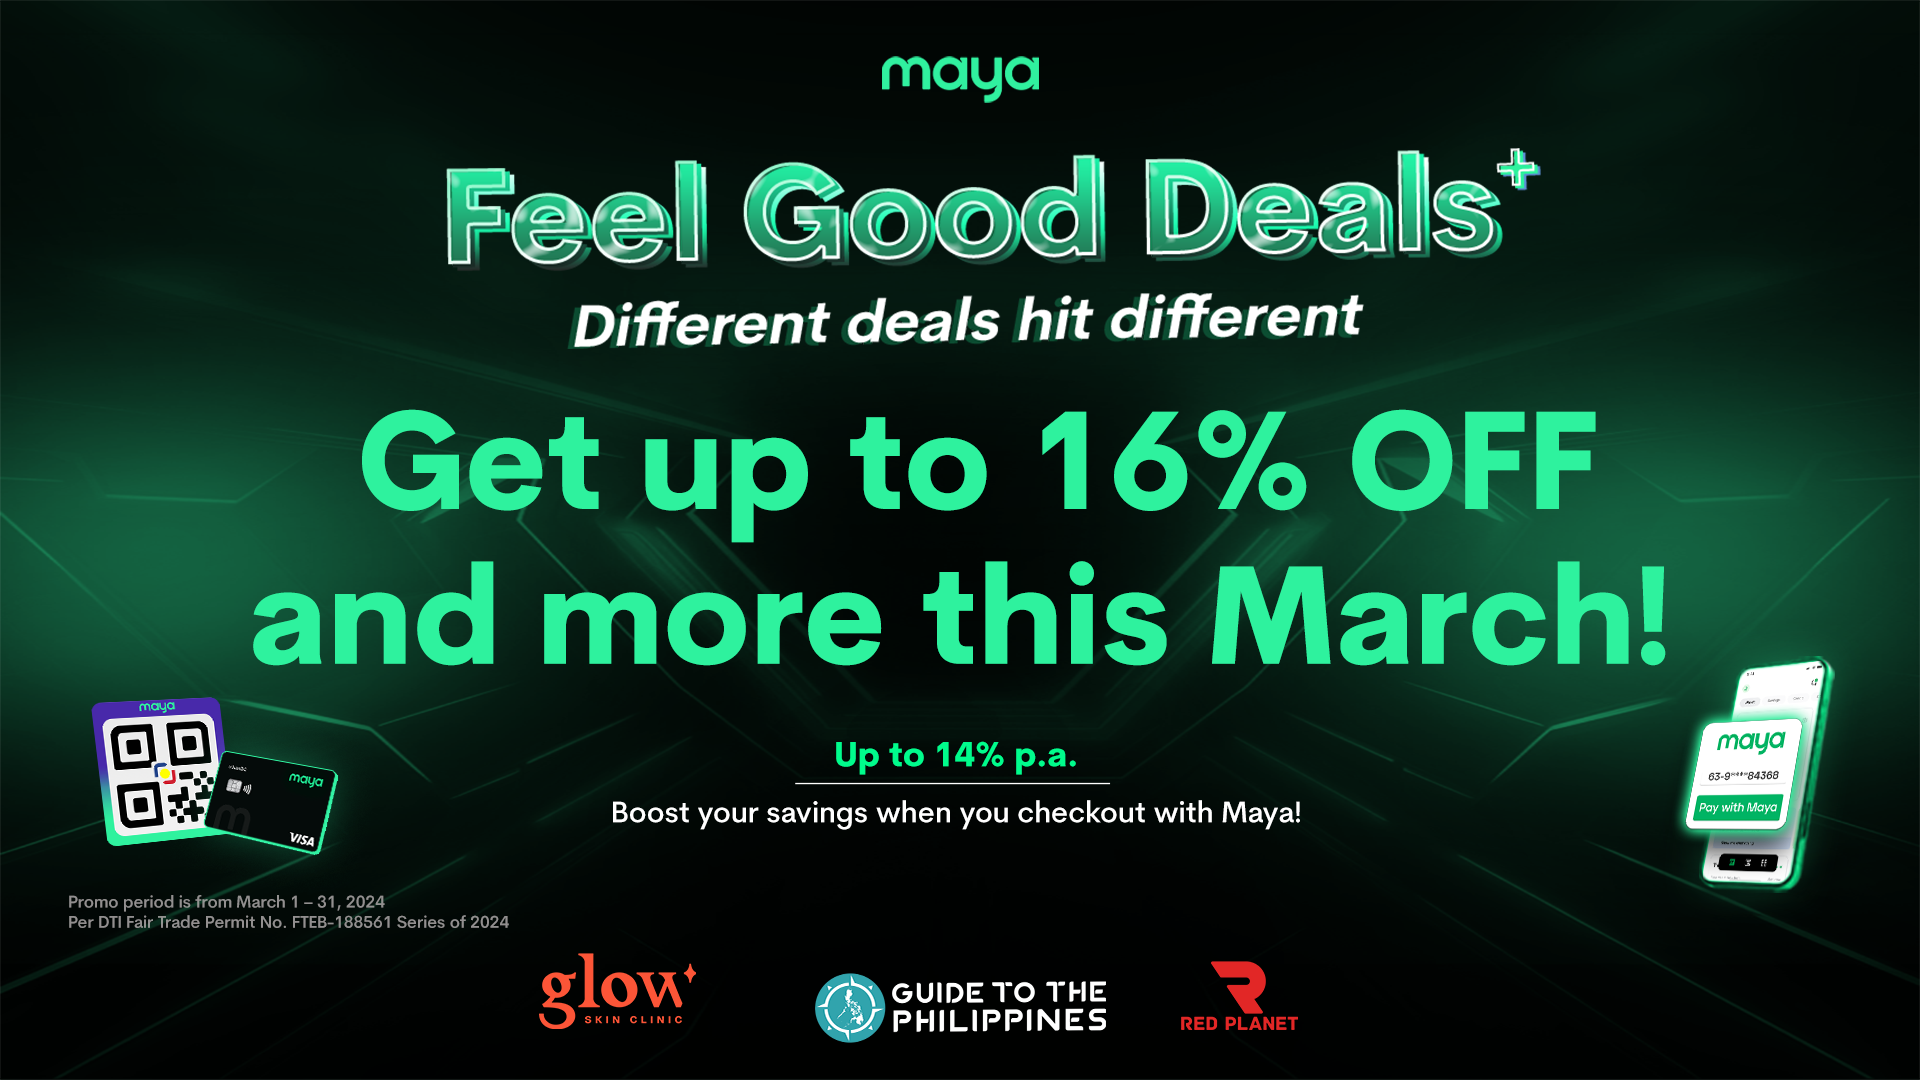 Feel Good with deals up to 16% OFF this March!